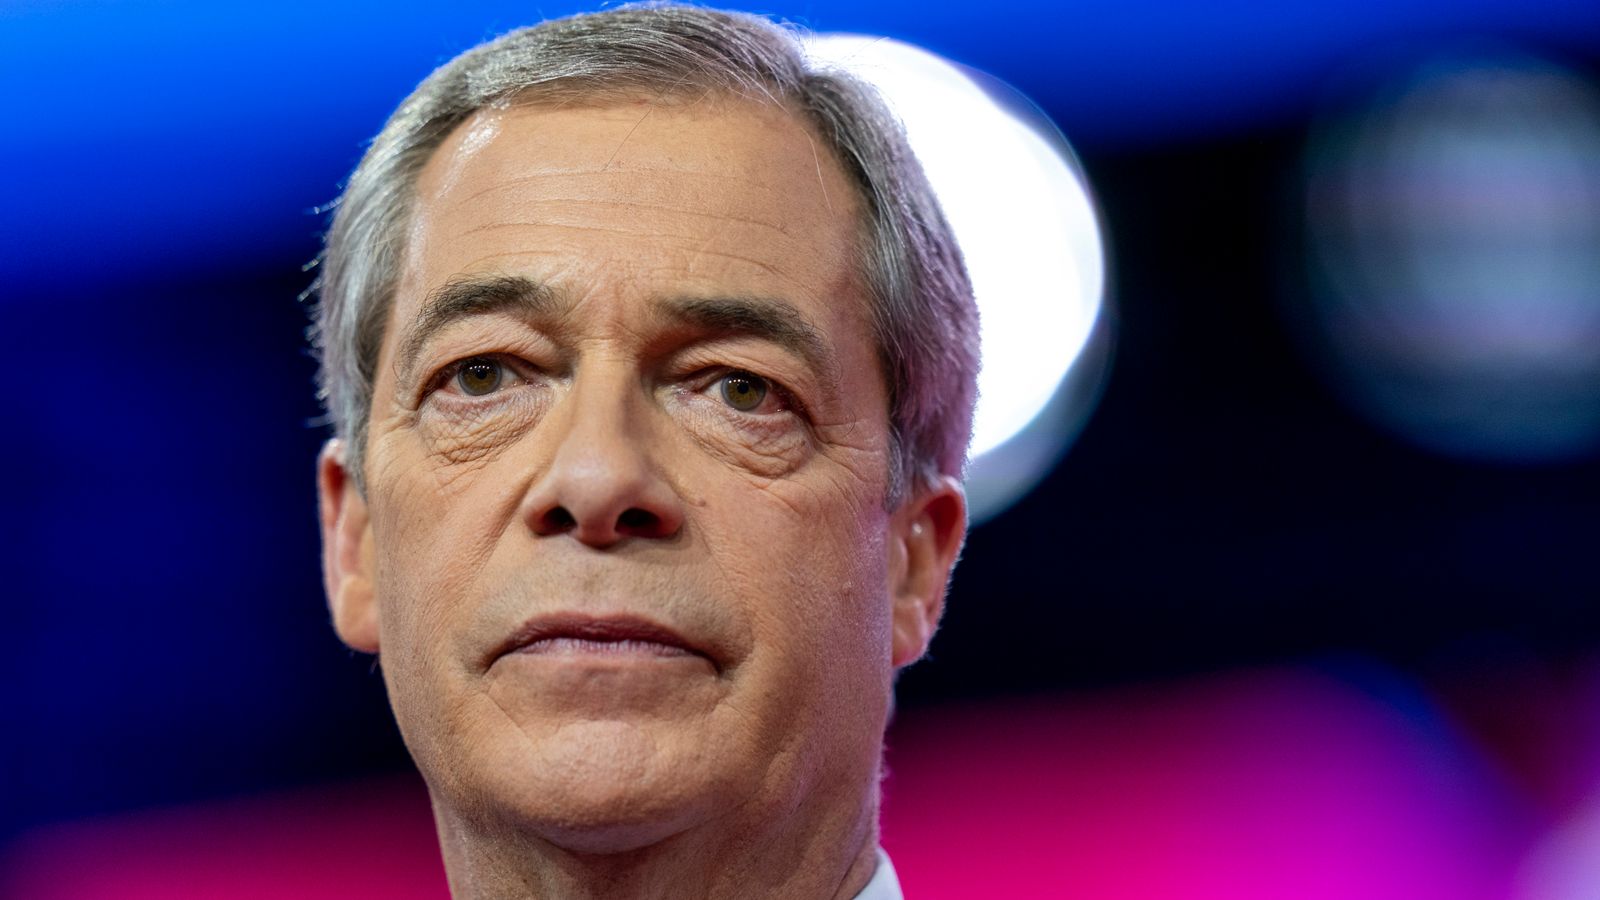 Farage debanking row: NatWest review finds no evidence of widespread political discrimination